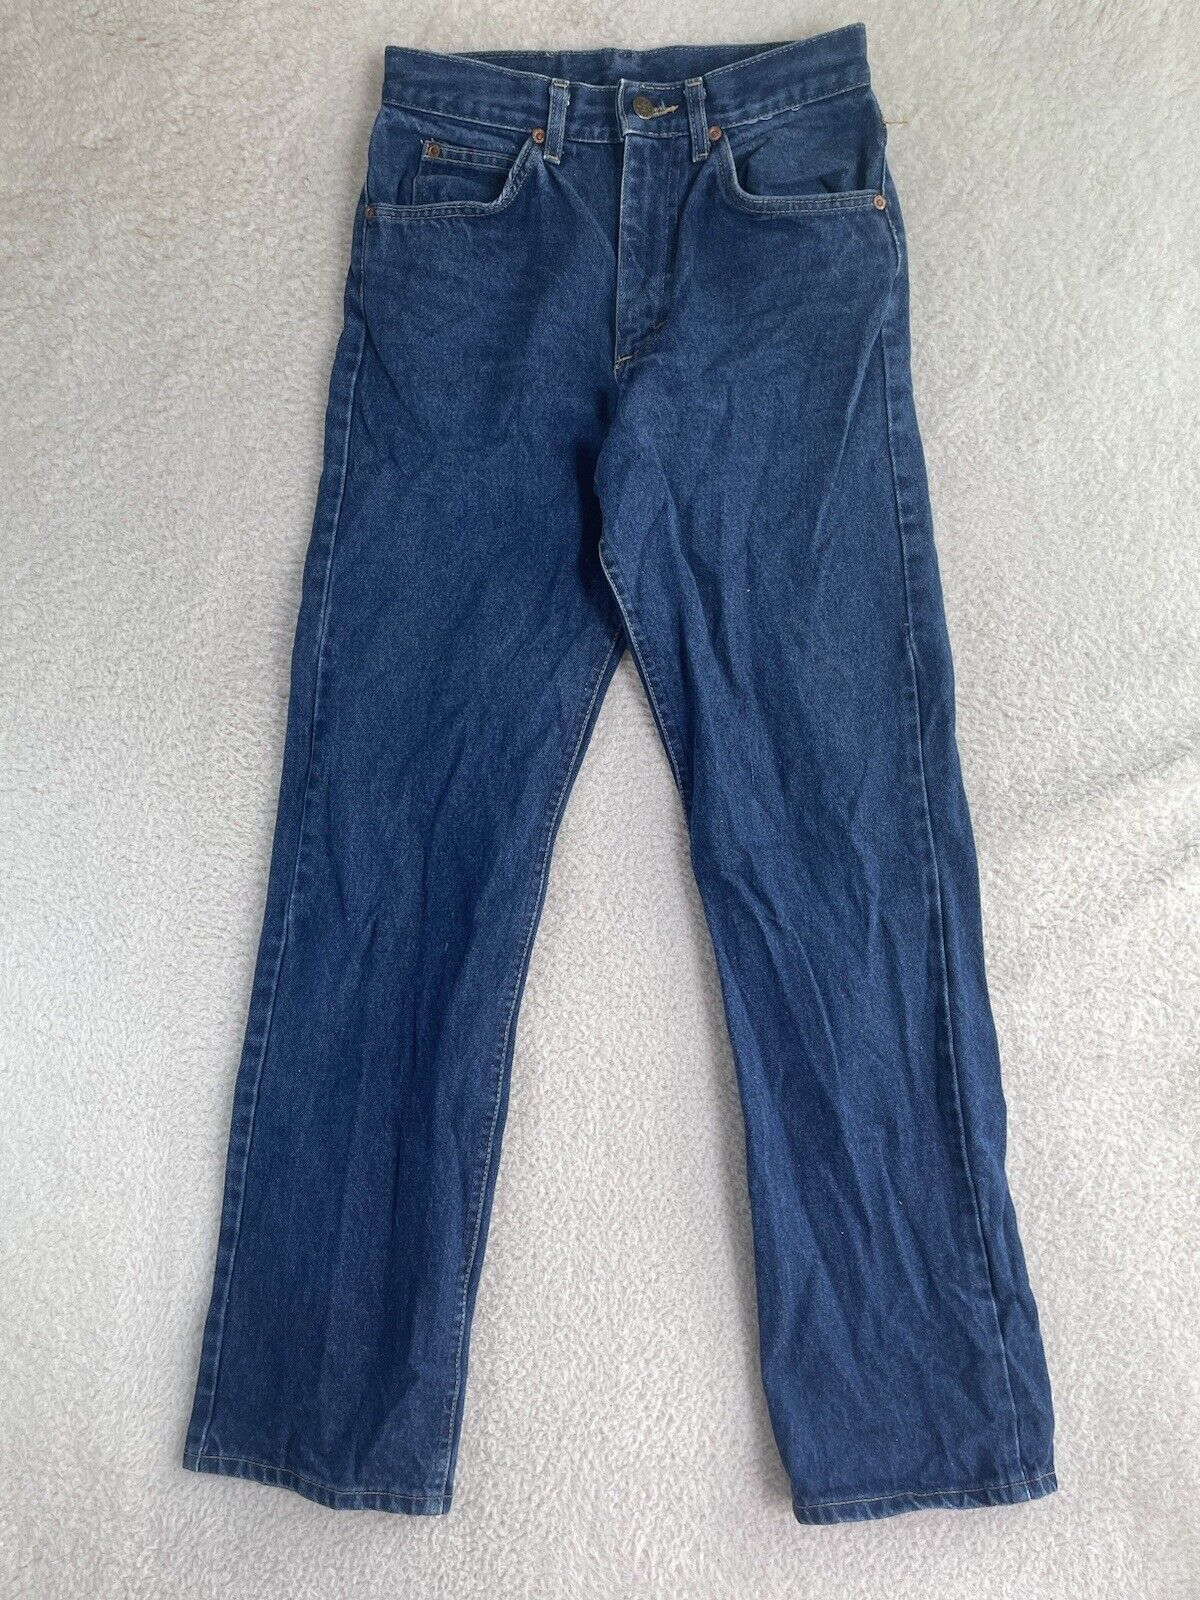 VTG Lee Riders Jeans Mens 29x32 Denim Union Made in USA 5 Pocket Work